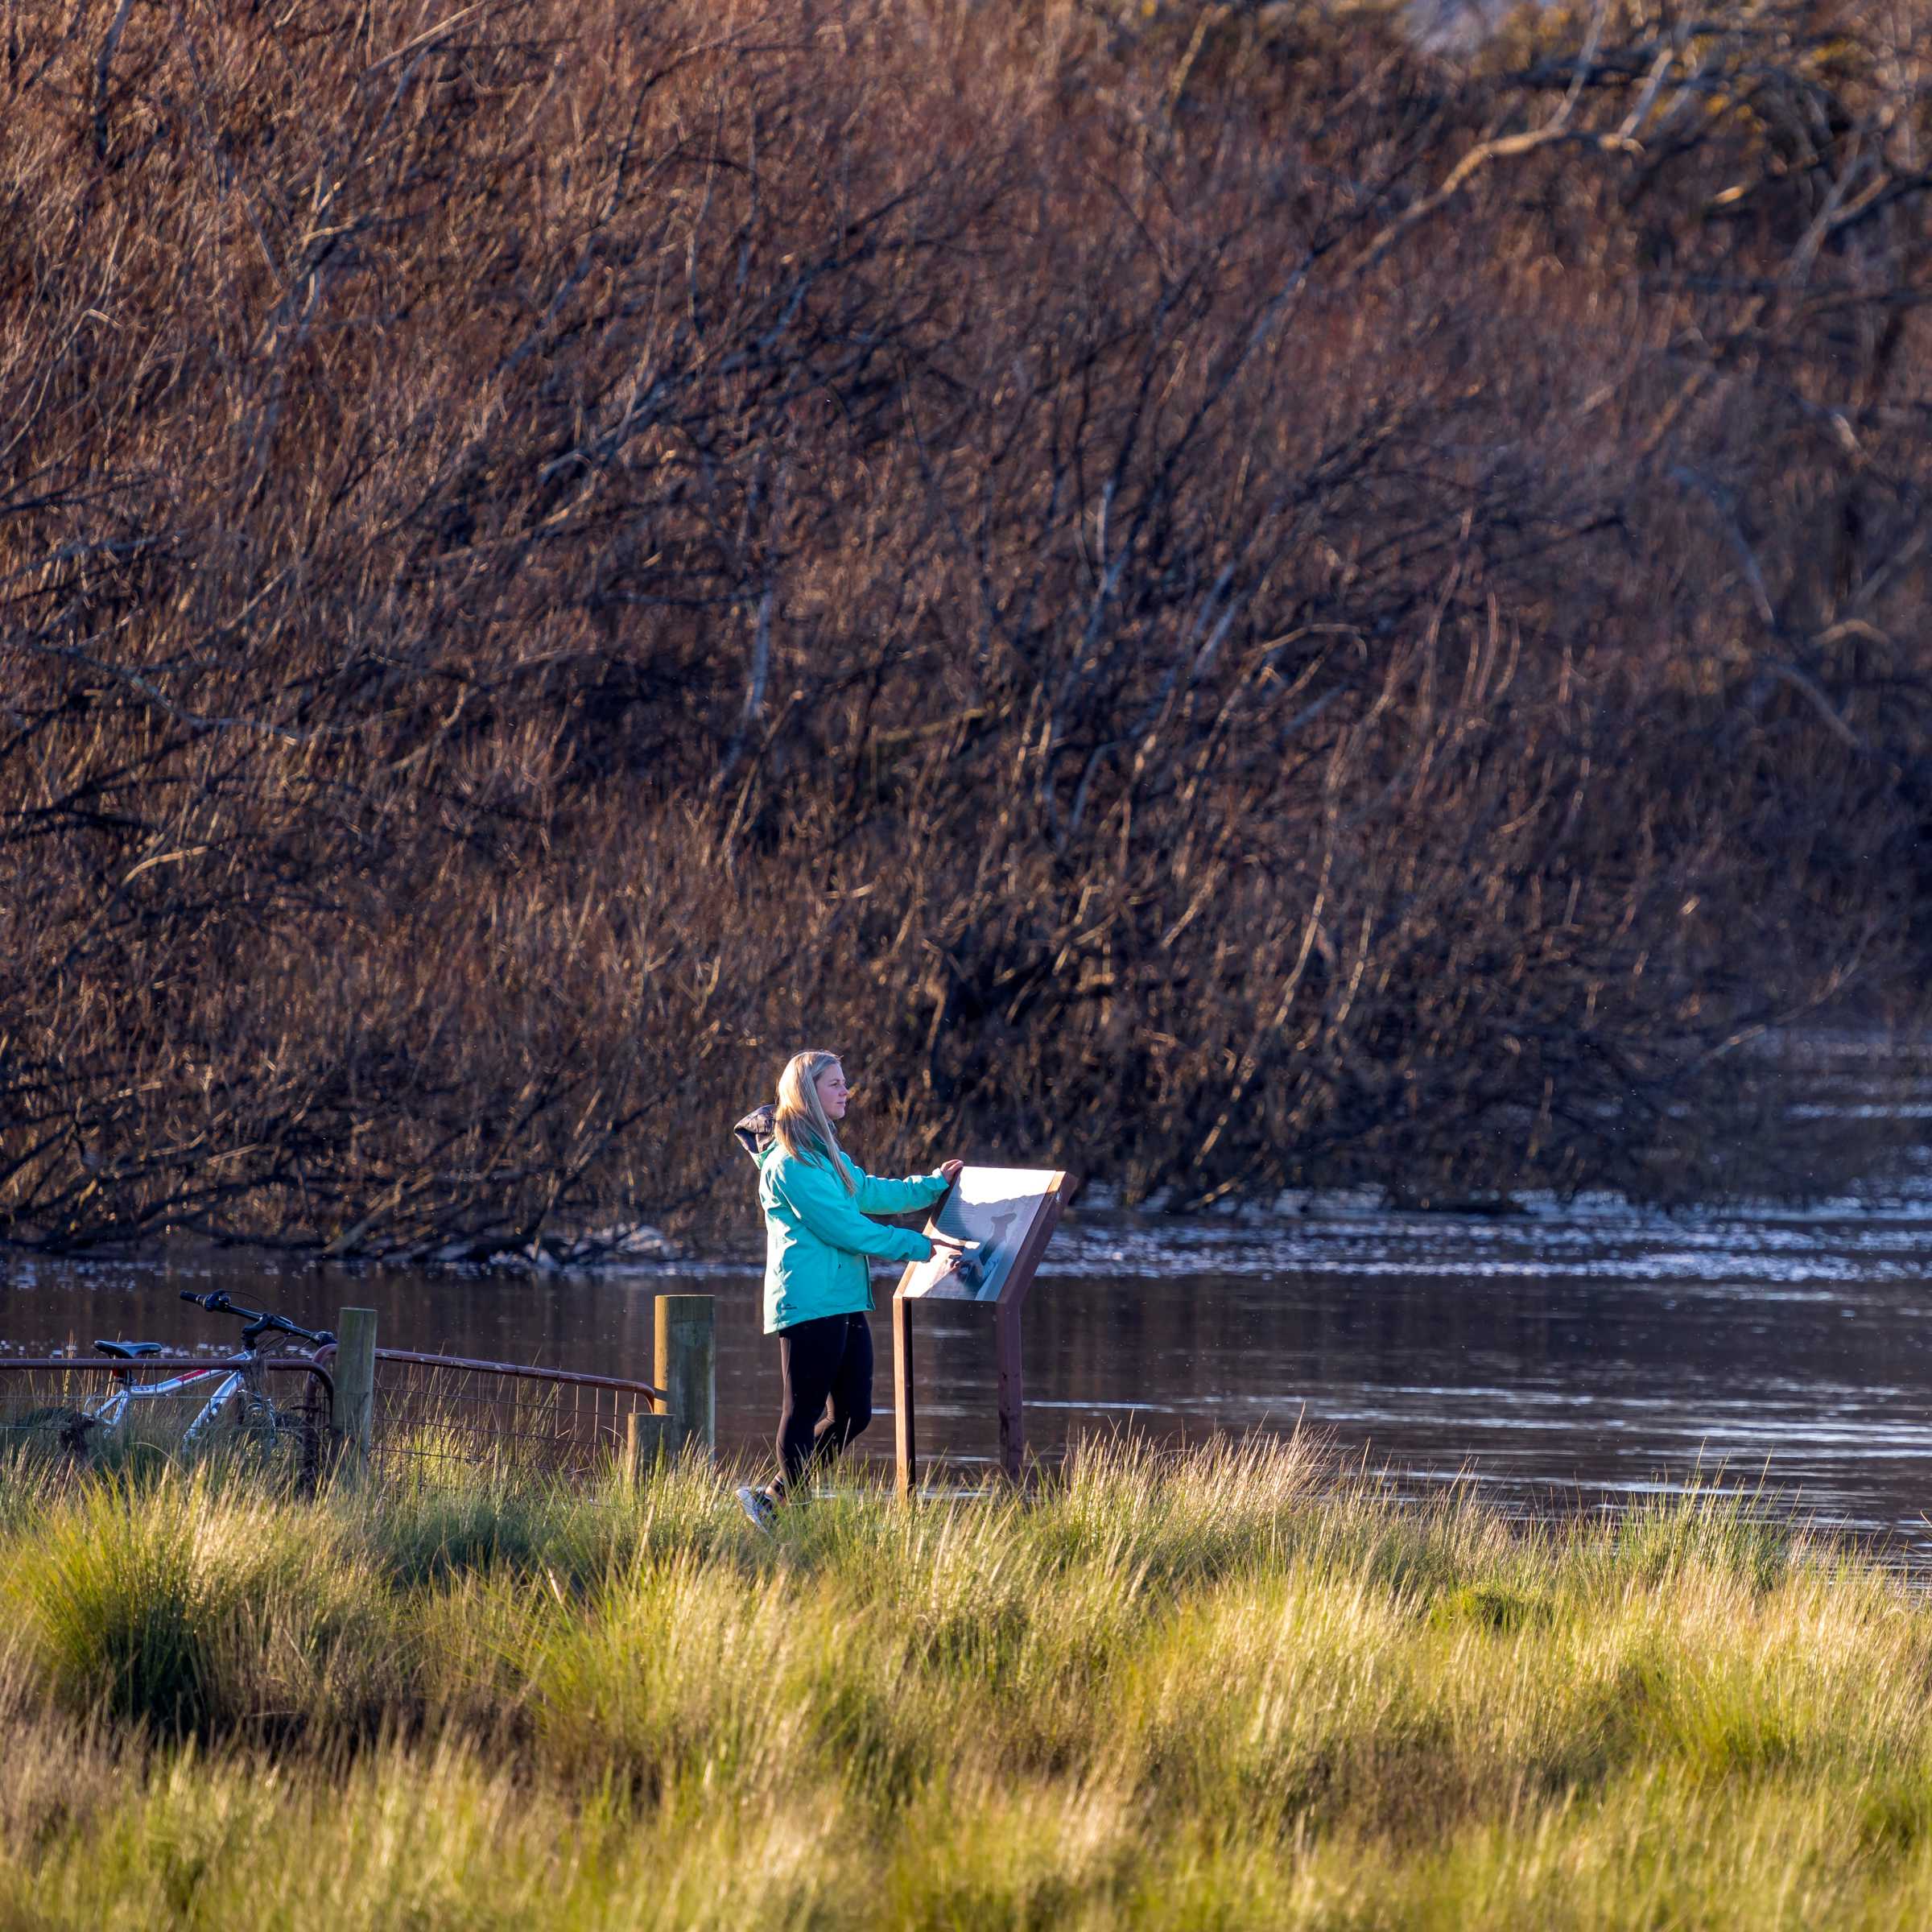 A person stands reading an information sign while overlooking the Macquarie River. The river bank is lined with willow trees and grass. Photo: Rob Burnett.